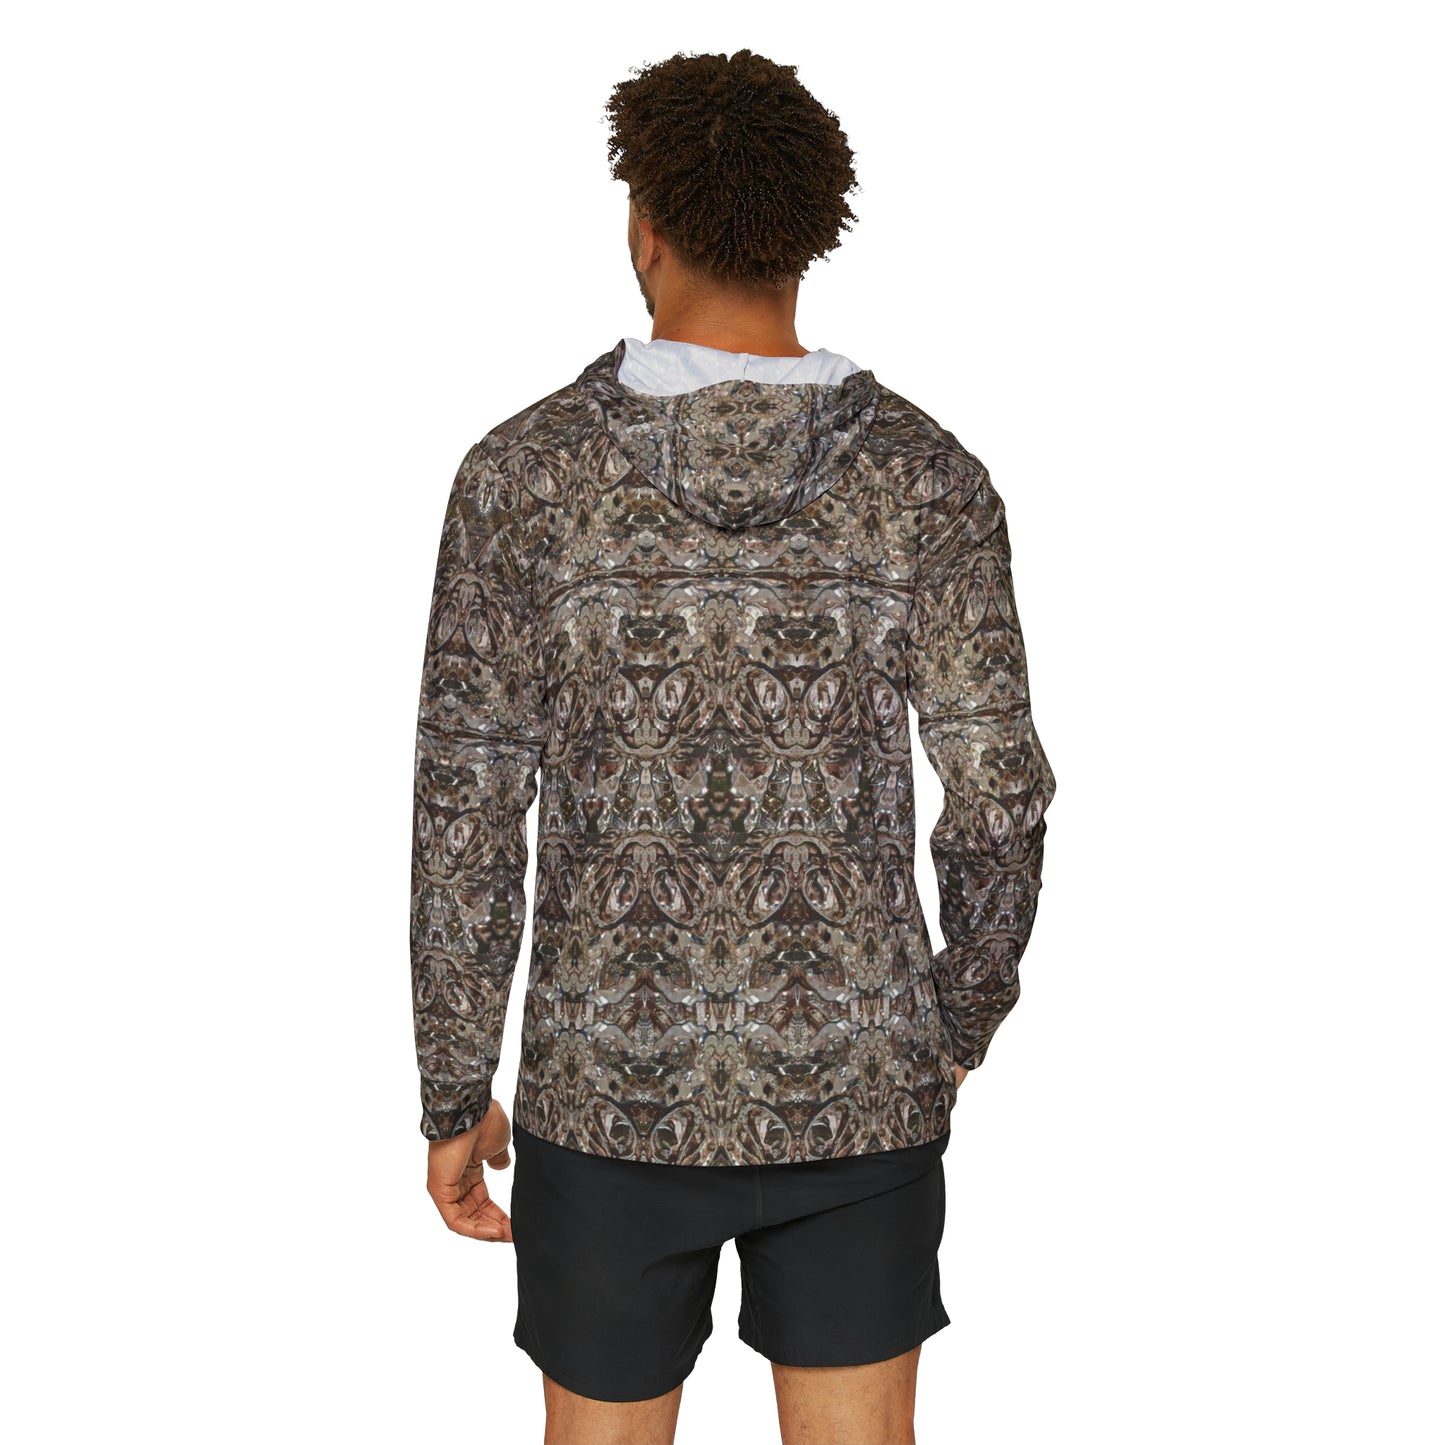 Athletic Activewear Hoodie (His/They)(Samhain Dream Thaw 8 of 15 Octo ex Quindecim) RJSTH@w2023 RJS